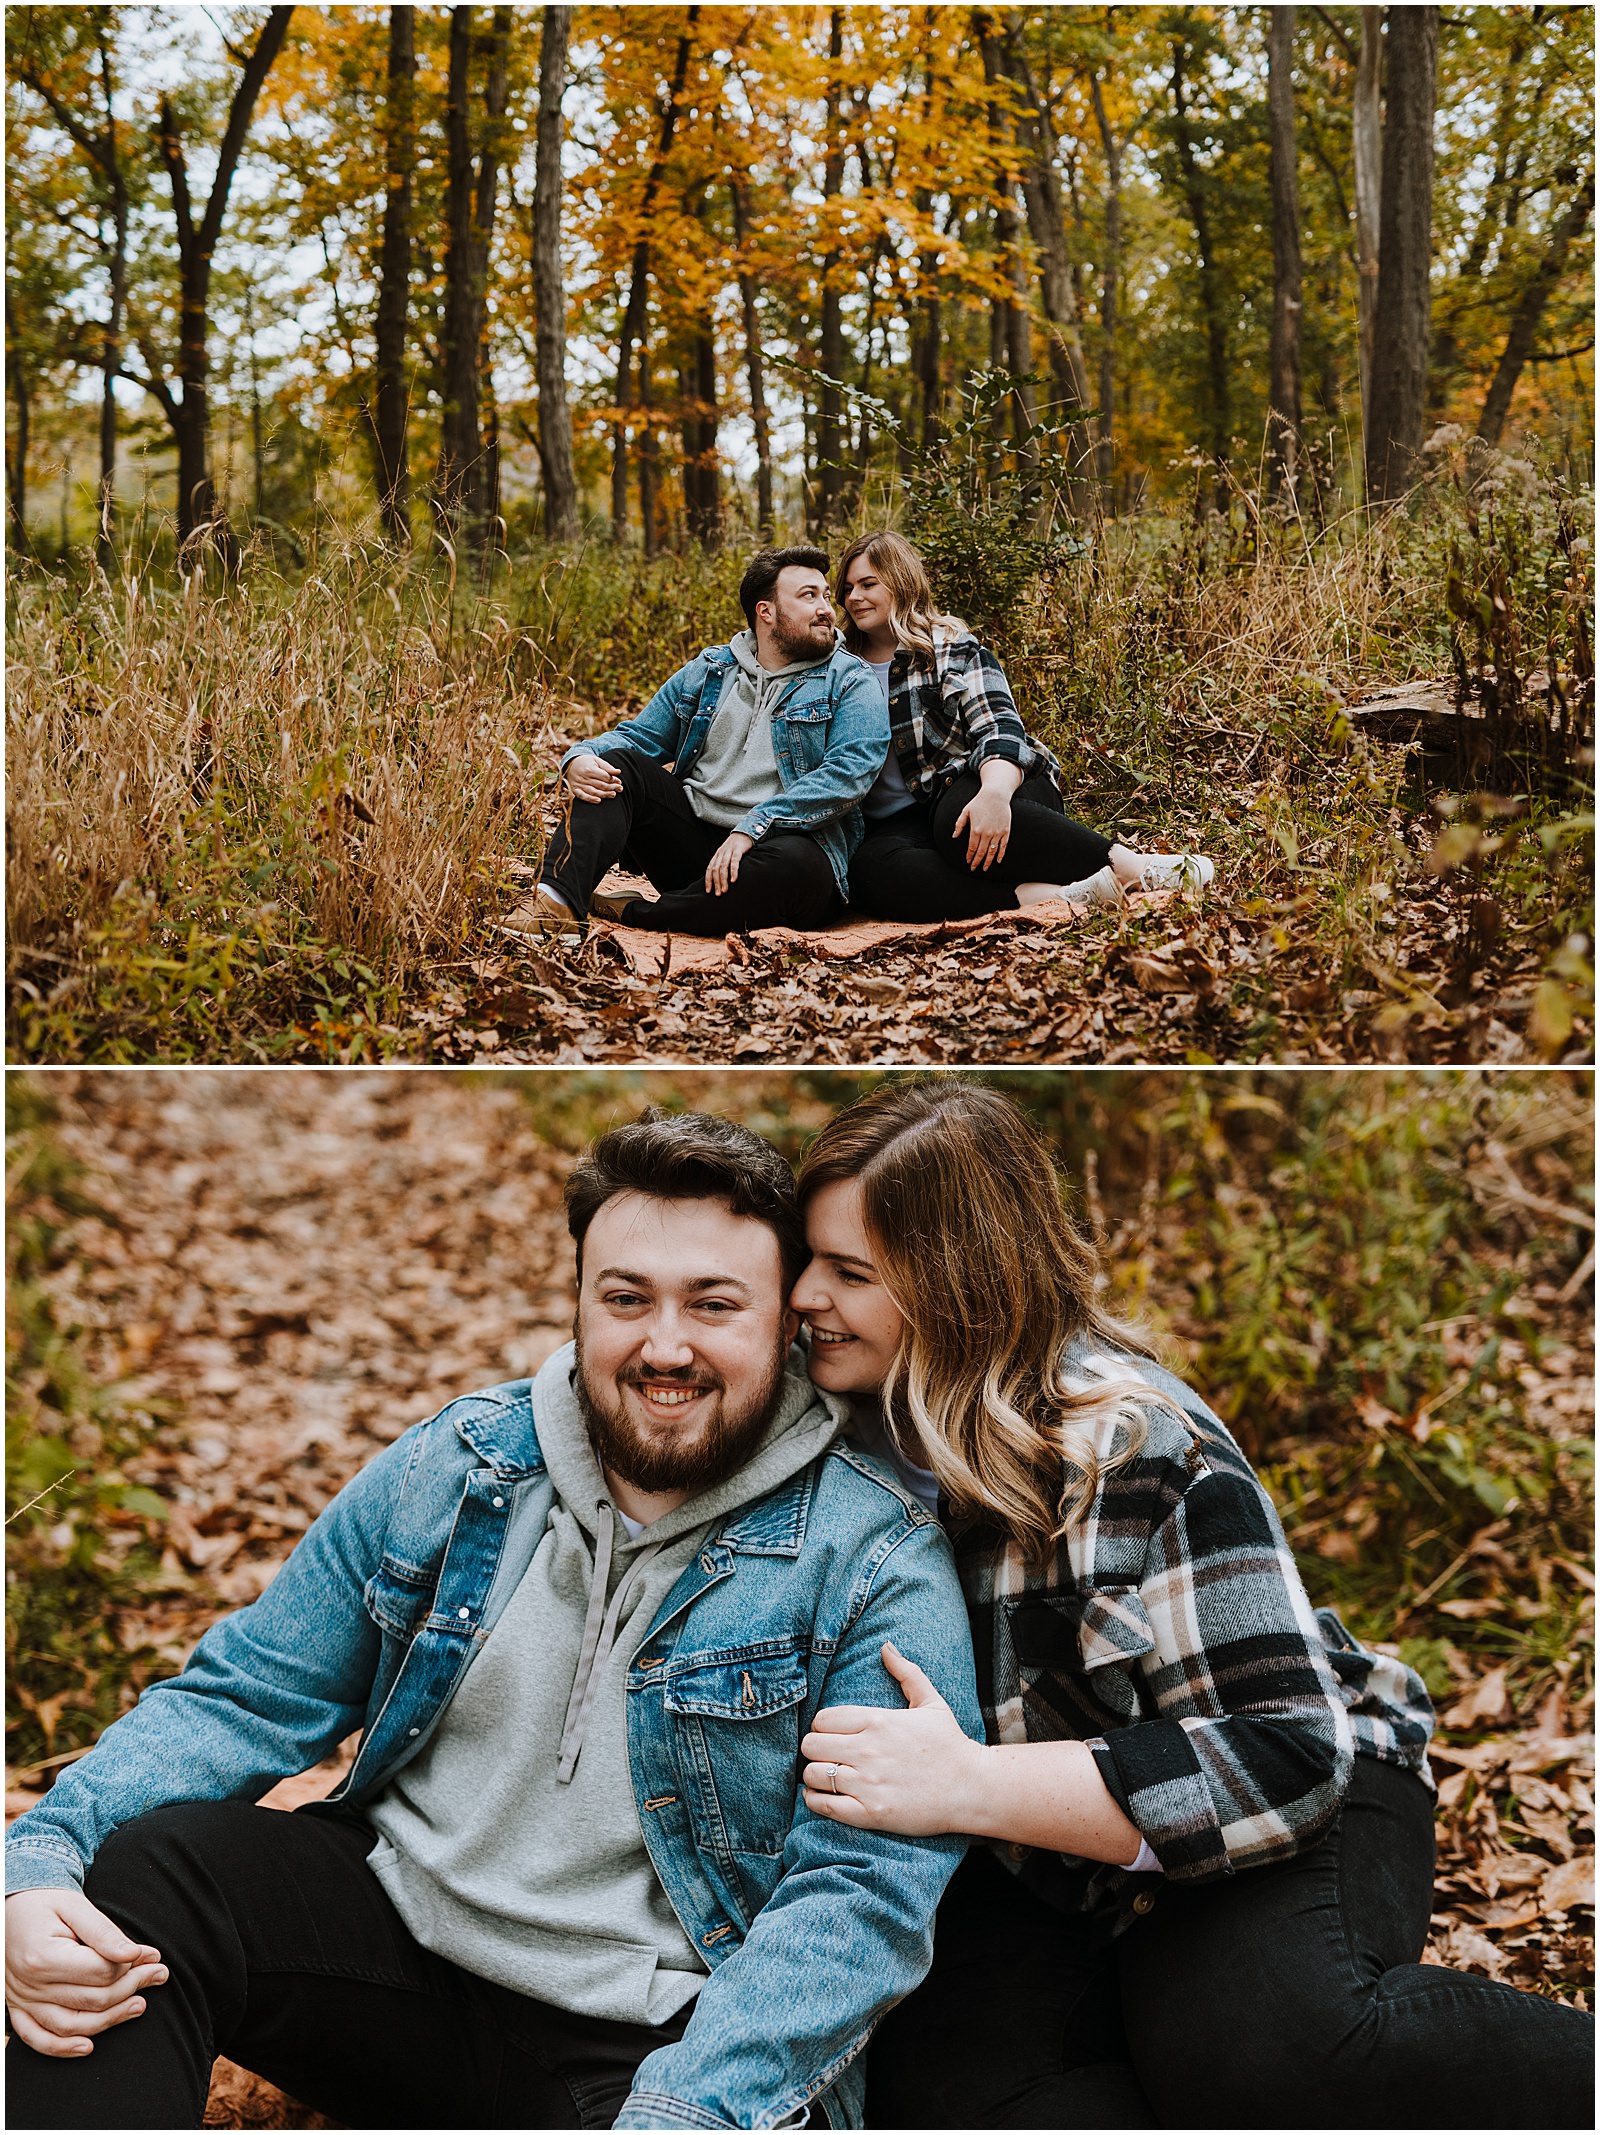 Fall Gallup Park Engagement Session